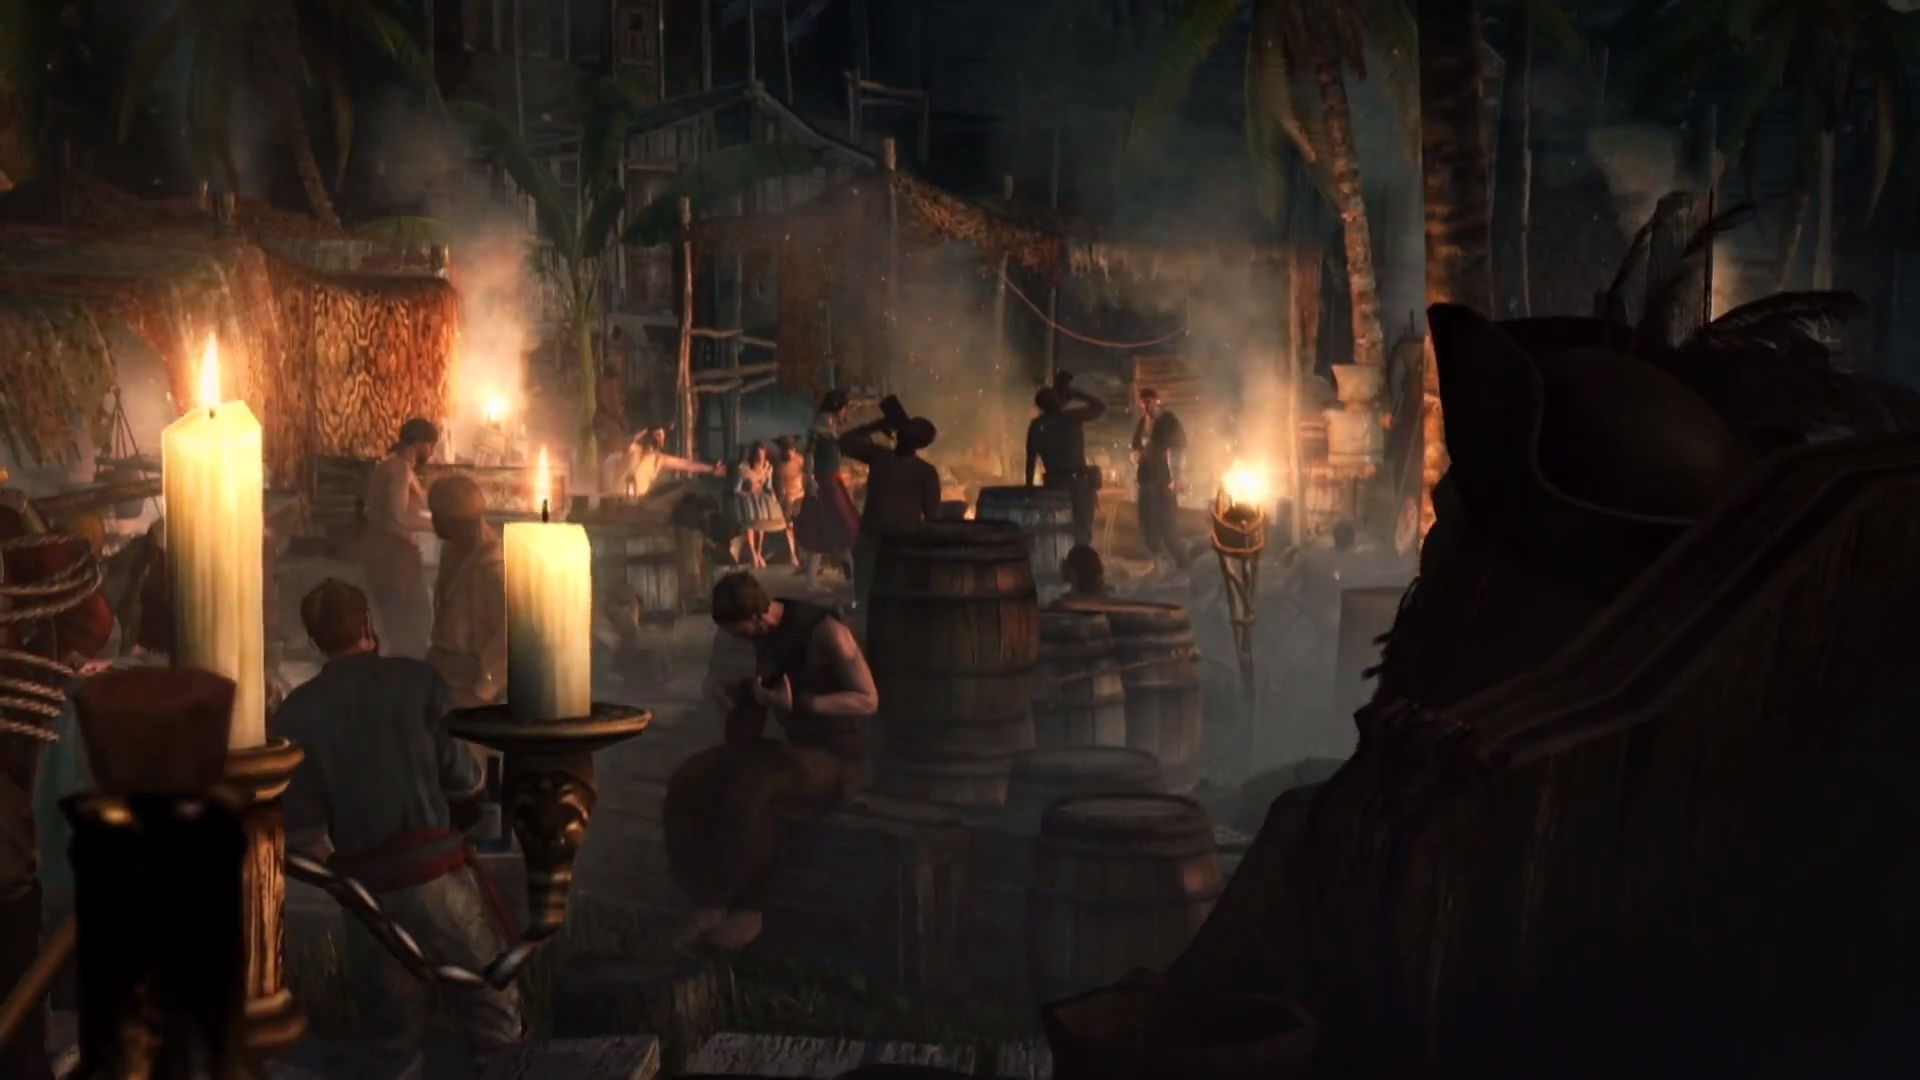 A Pirate’s Life on High Seas – Assassin’s Creed IV: Black Flag Trailer